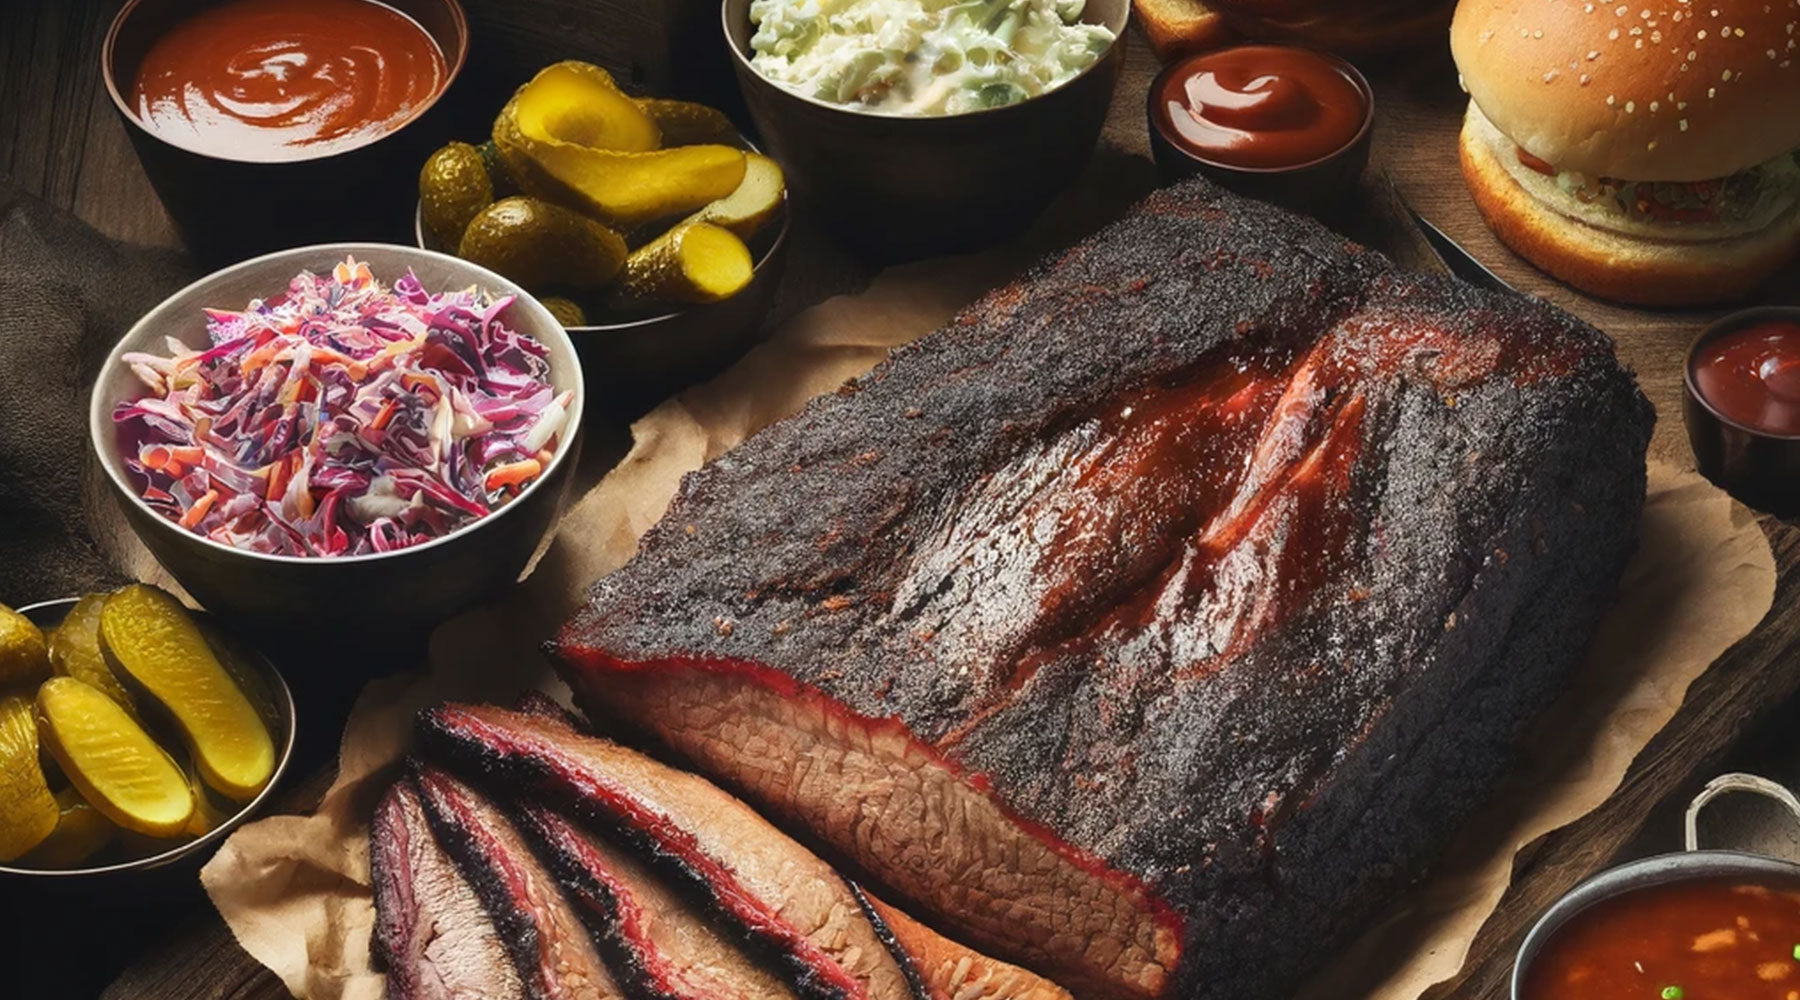 Texas style bbq image of brisket and all the side dishes.